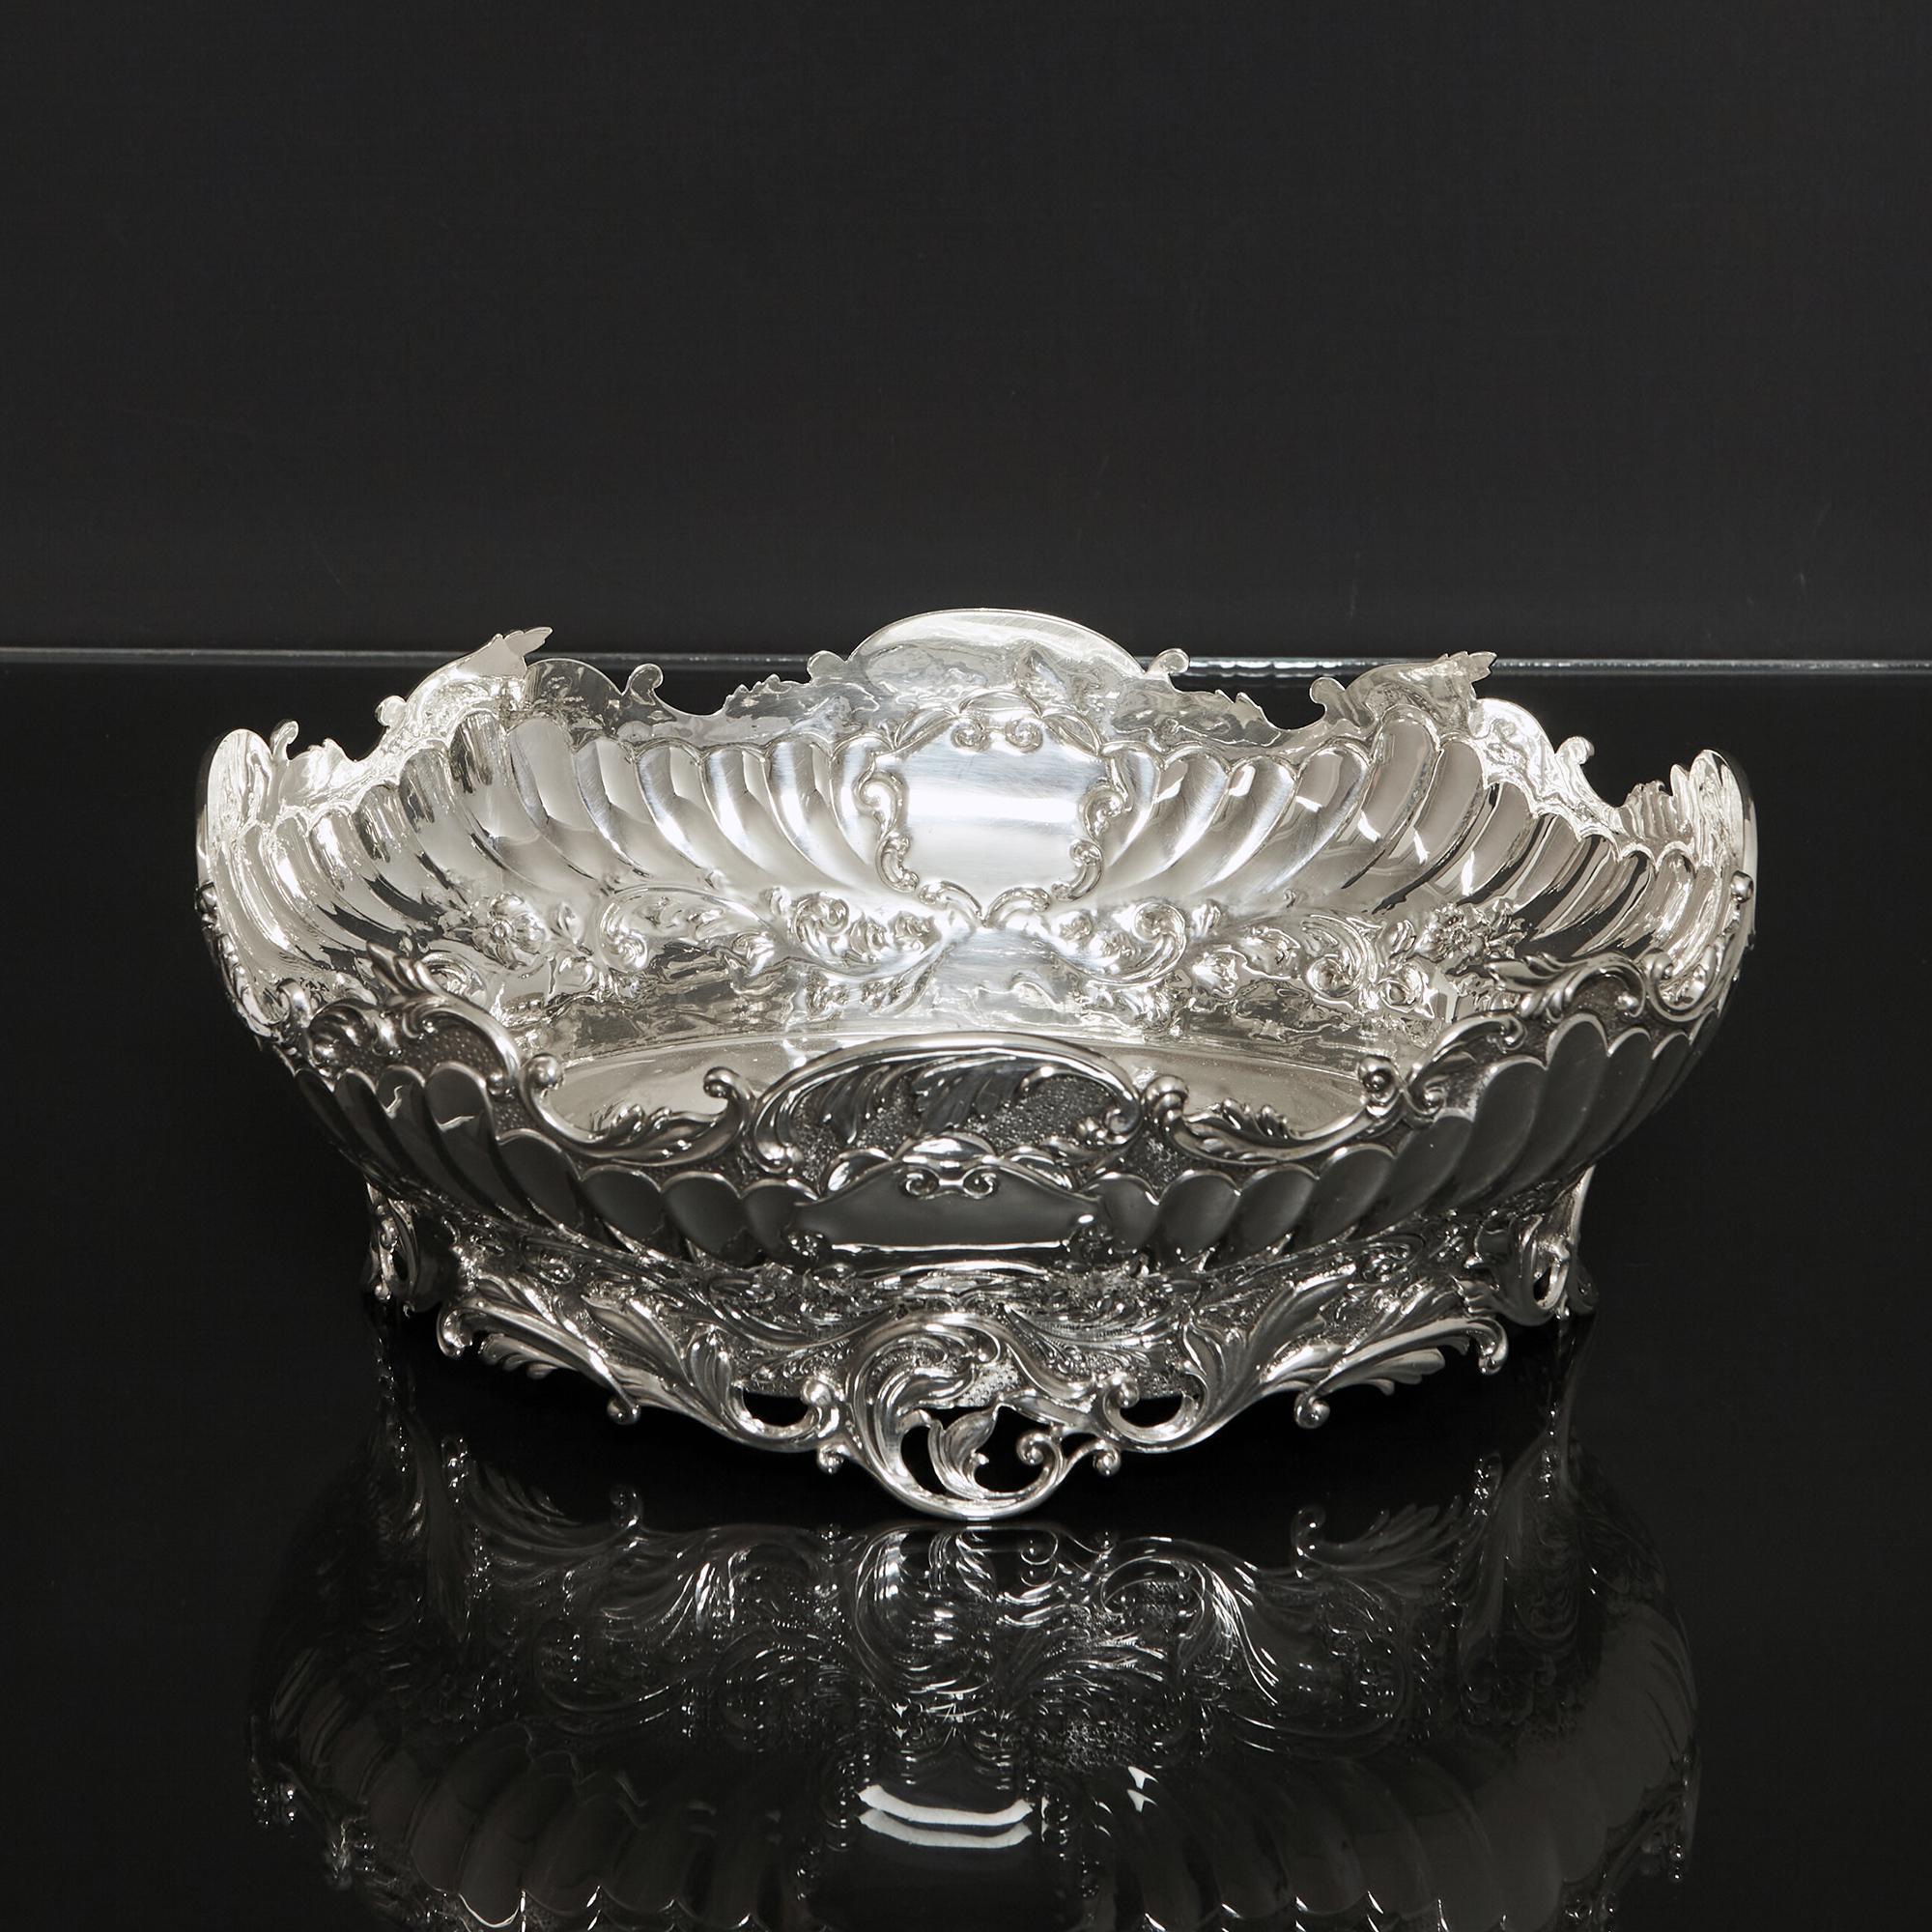 A shallow oval antique silver bowl with scalloped rim and cast openwork foot. This attractive silver piece will make a wonderful centrepiece for a dining table and could be used for a fruit or flower display. The shaped border is cast with leaf and